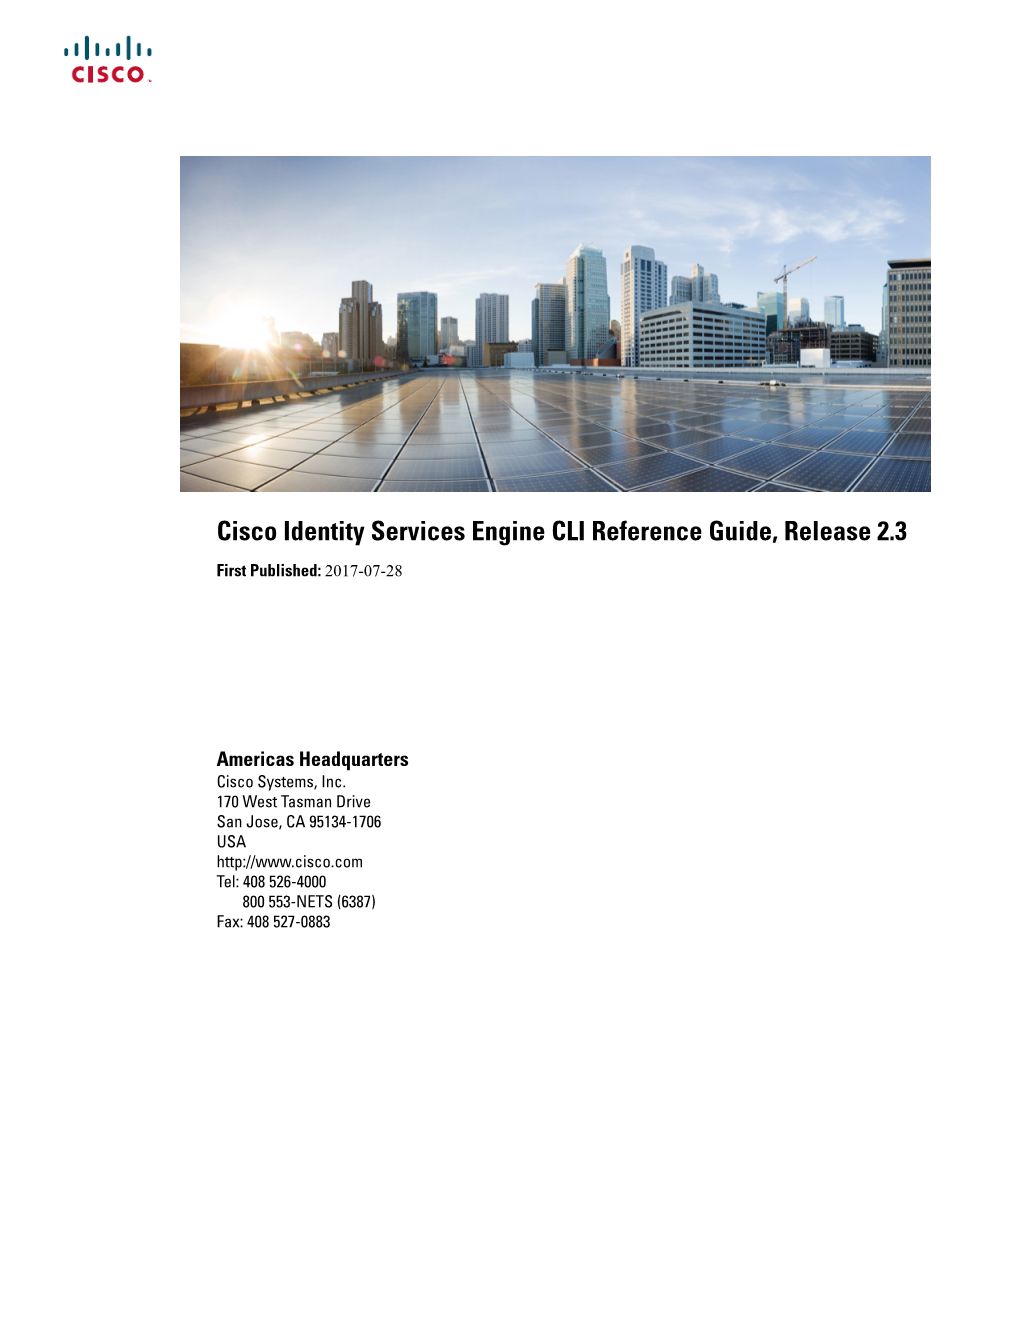 Cisco Identity Services Engine CLI Reference Guide, Release 2.3